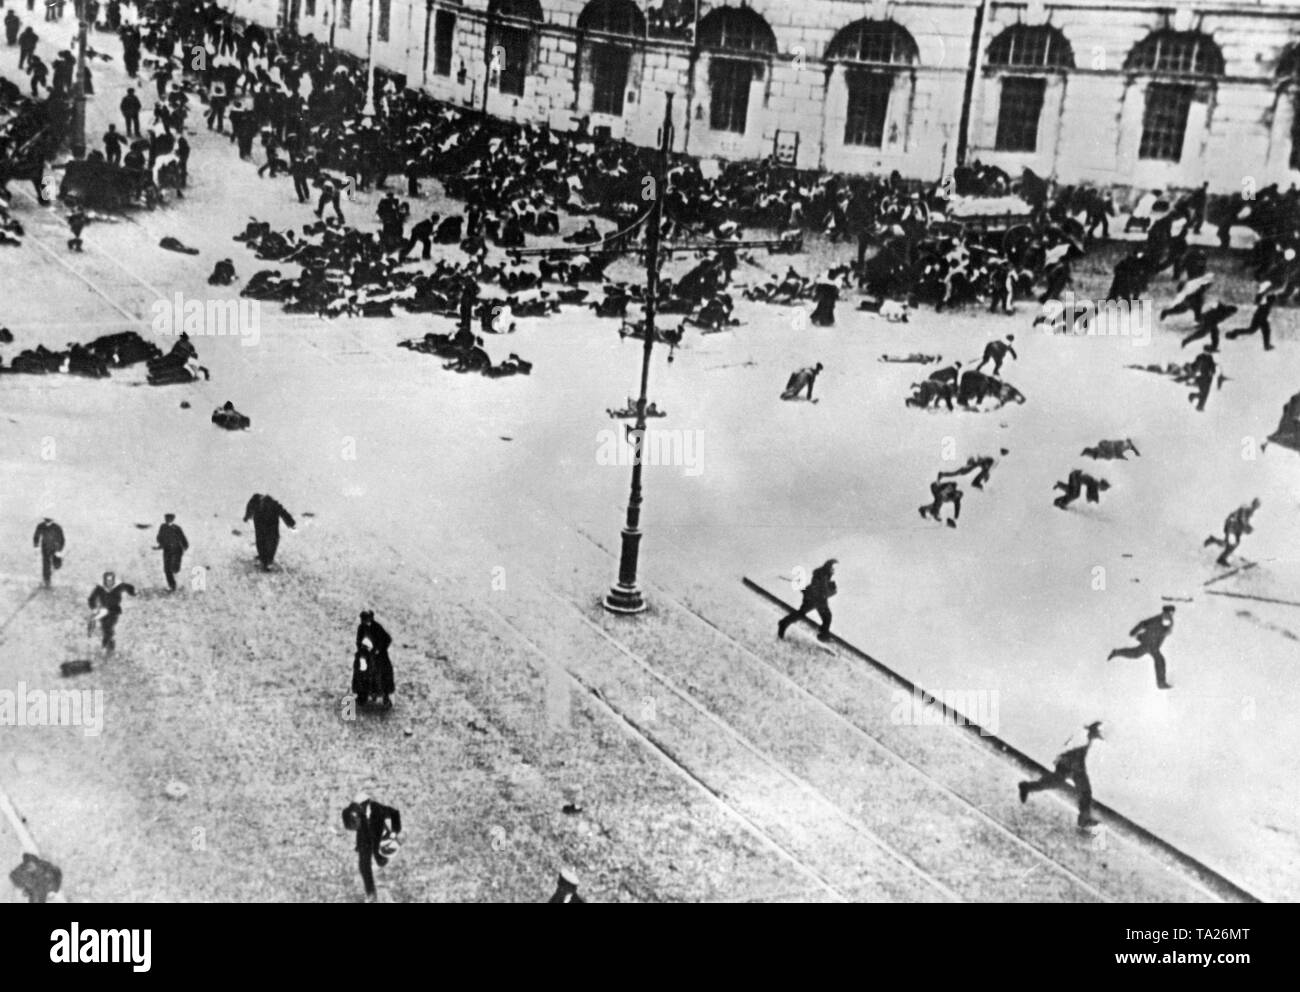 The demonstrations of the Bolsheviks against the provisional government of Kerensky resulted in shootings on the streets of St. Petersburg in July, 1917. Stock Photo